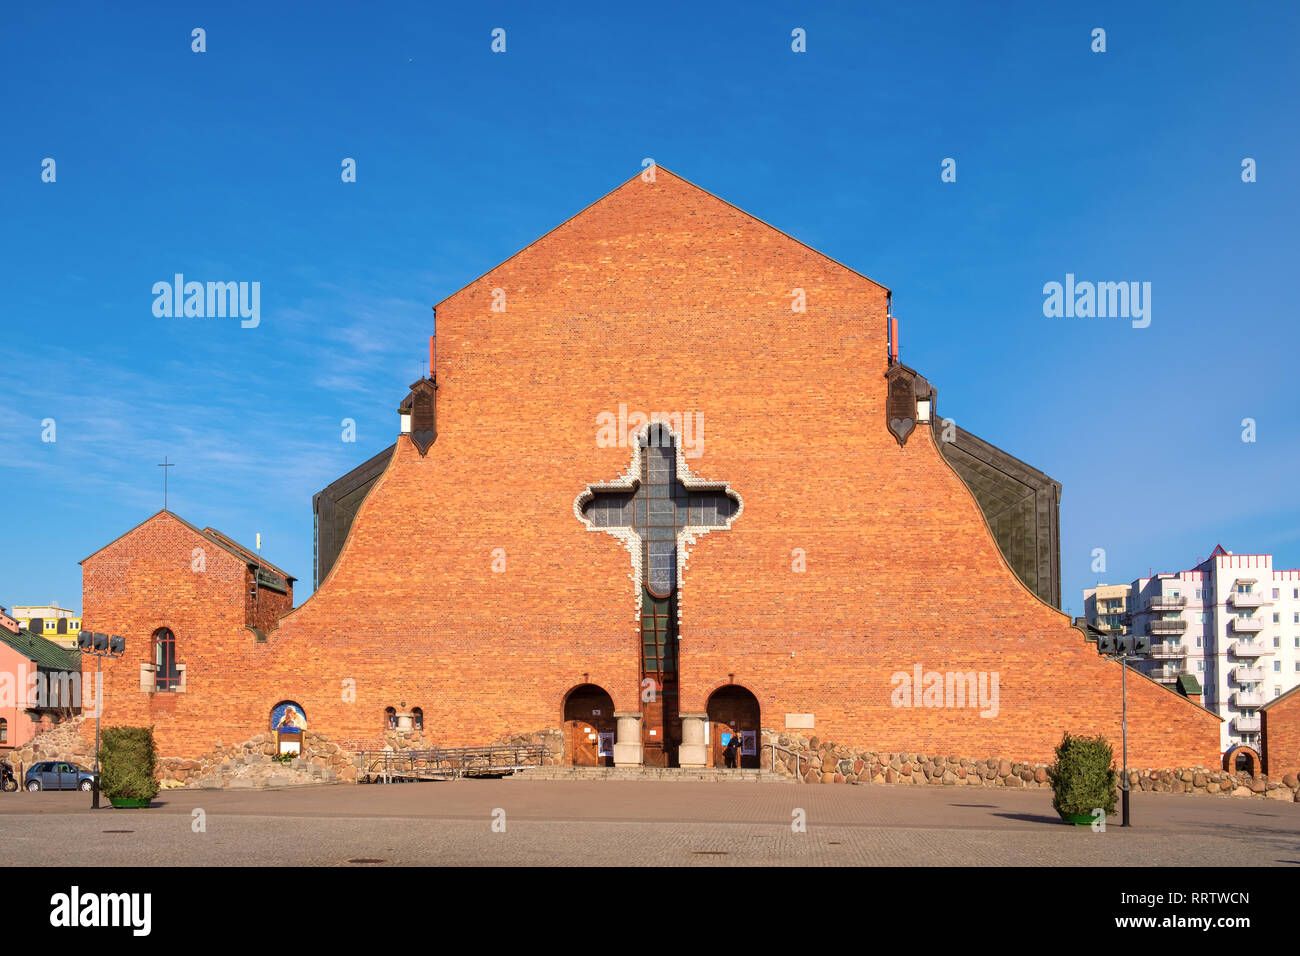 Warsaw, Mazovia / Poland - 2019/02/23: Brick modernistic facade of the Holy Ascension church in Stoklosy district of Warsaw, in Ursynow part of the ci Stock Photo